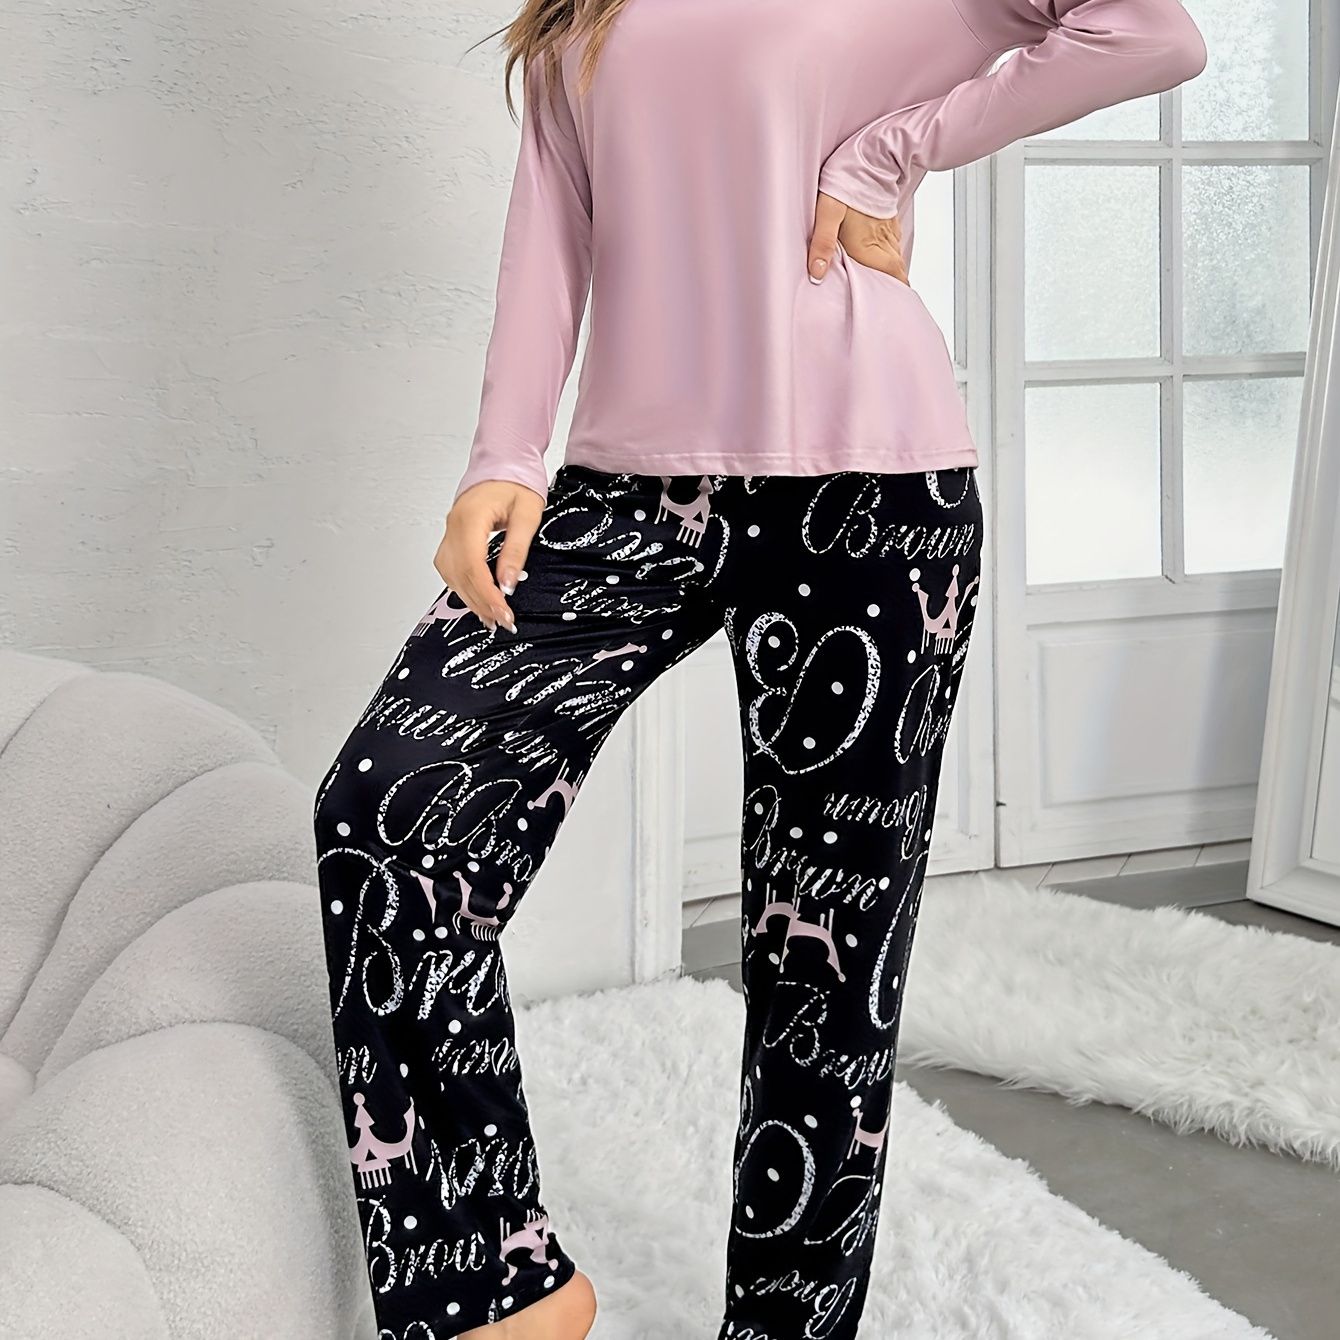 

Women's Crown & Letter Print Casual Pajama Set, Long Sleeve Round Neck Top & Pants, Comfortable Relaxed Fit For Fall & Winter